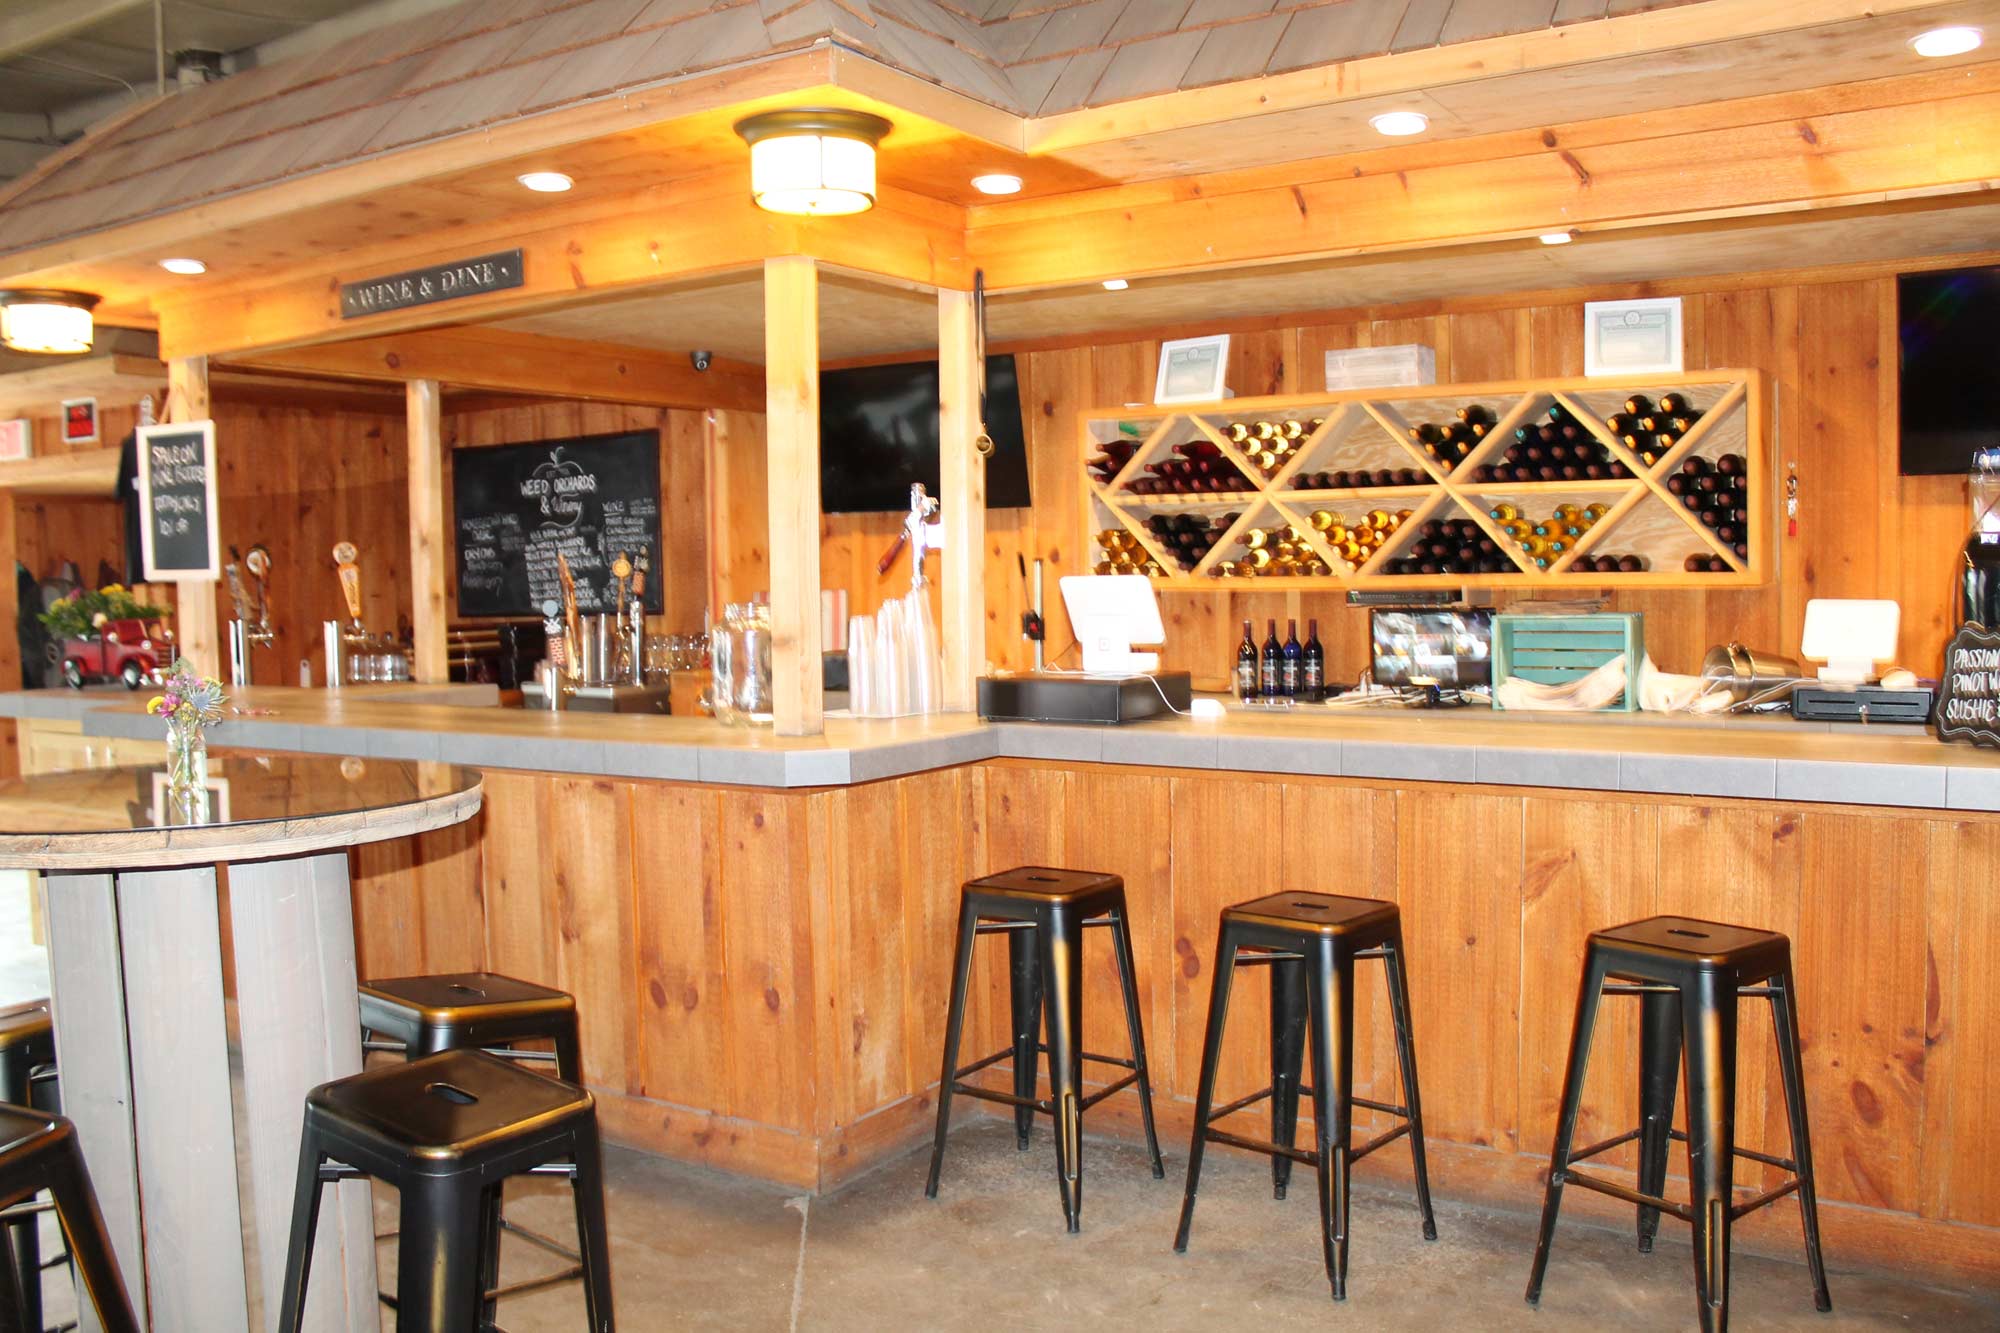 A side view of the winery that shows bar stool seating near the winery counter.